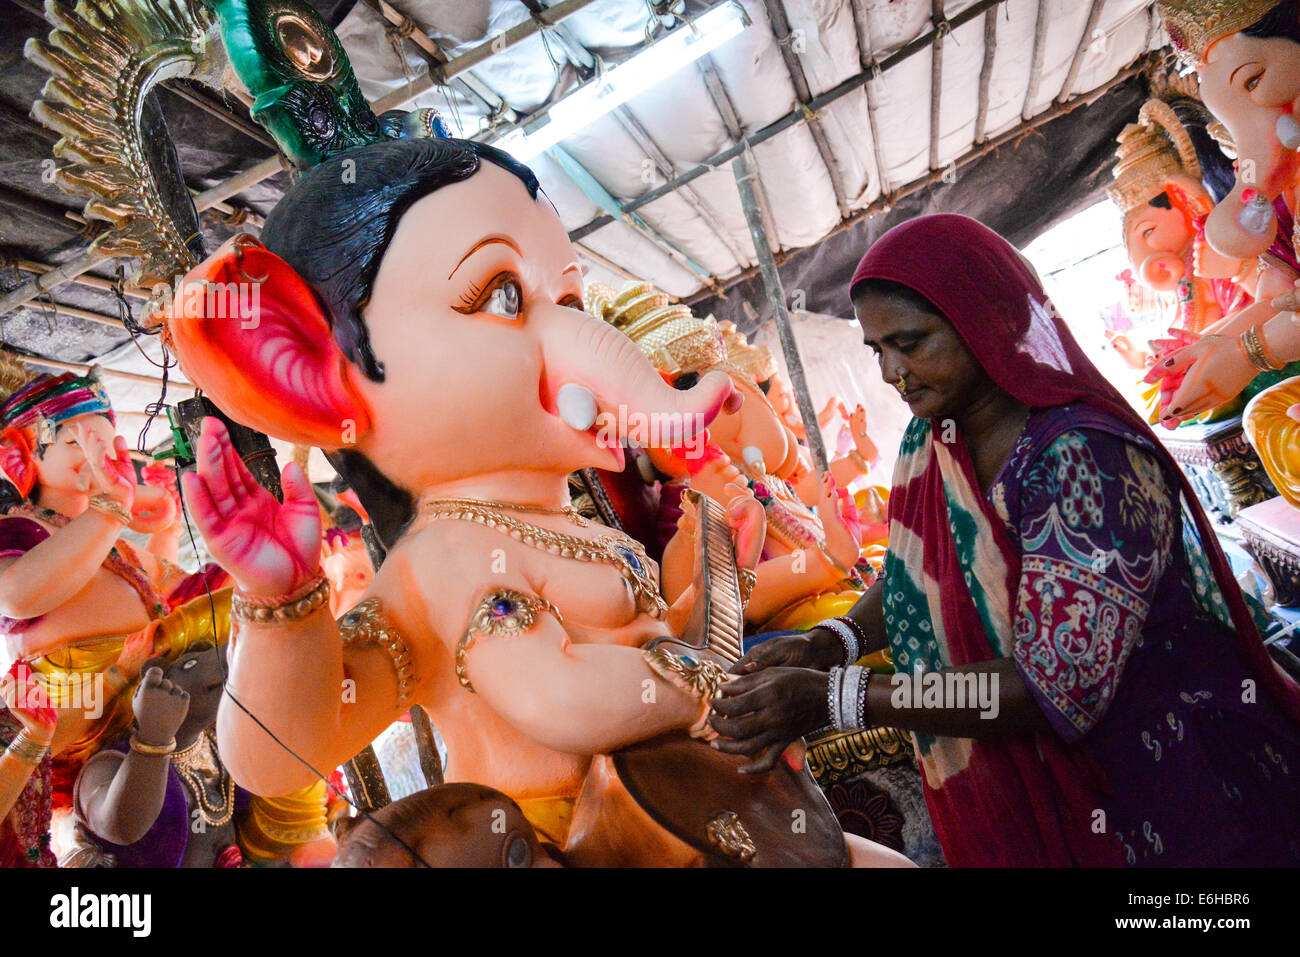 Ahmedabad, Gujarat, India, 24th Aug, 2014. :Maniben cleaning the idol on sunday morning for sale, Gulbai tekra is the single largest  supplier of Ganesha idols in Ahmedabad, Gujarat India. Credit:  Nisarg Lakhmani/Alamy Live News Stock Photo